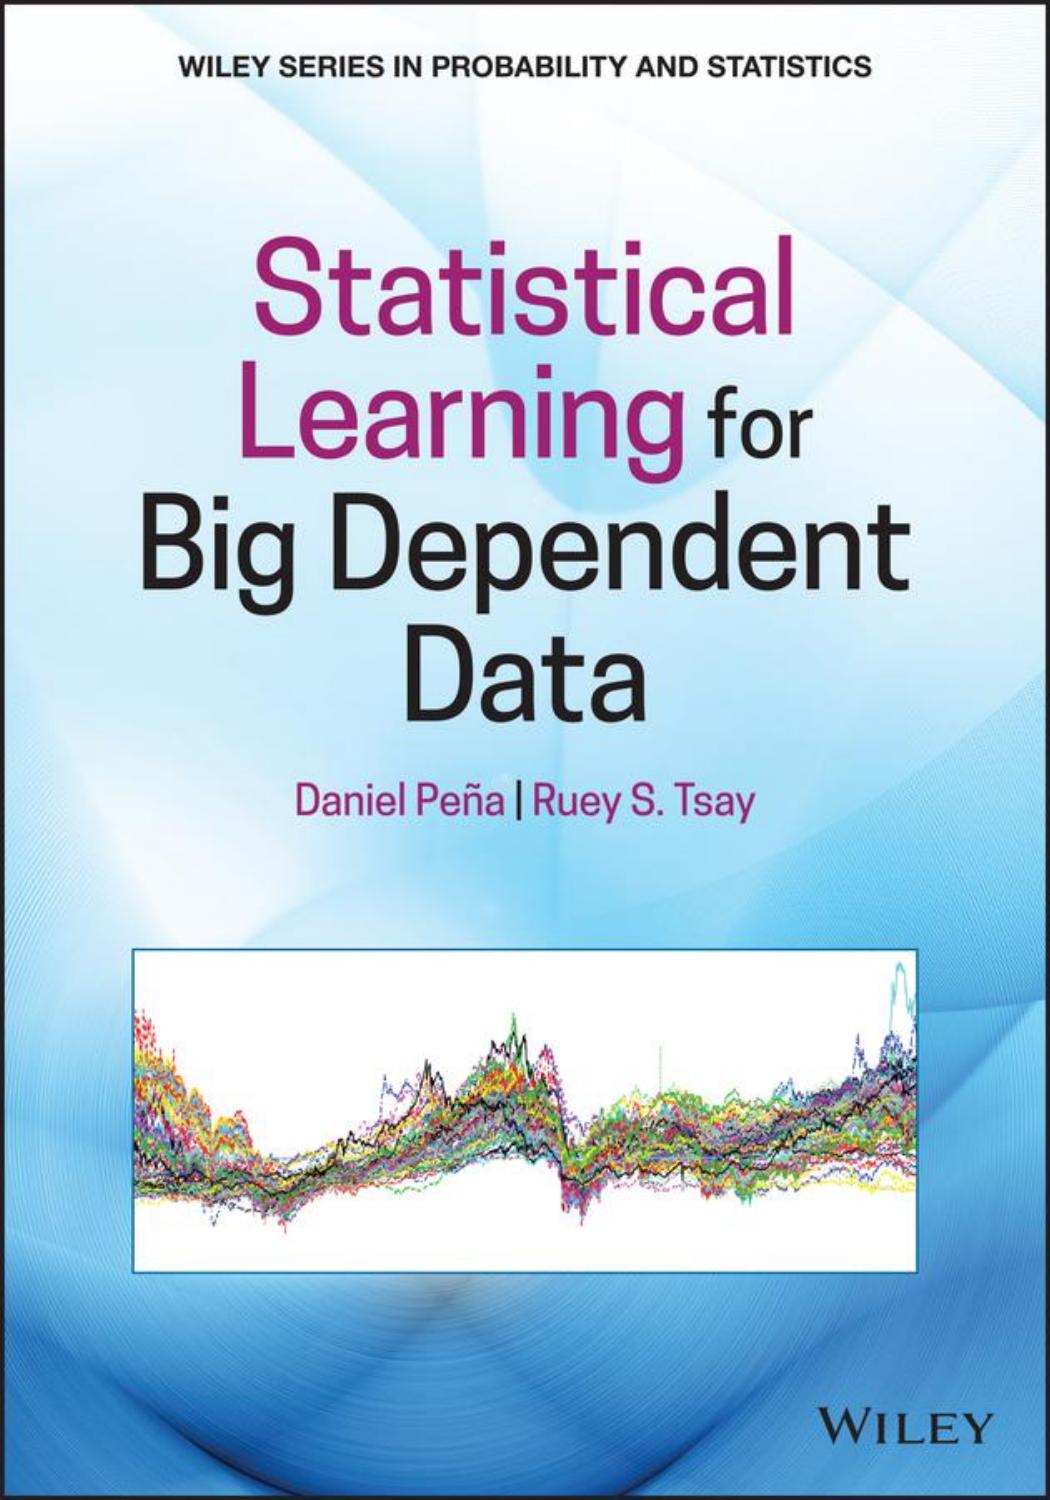 Statistical Learning for Big Dependent Data (Wiley Series in Probability and Statistics) by Daniel Peña Ruey S. Tsay